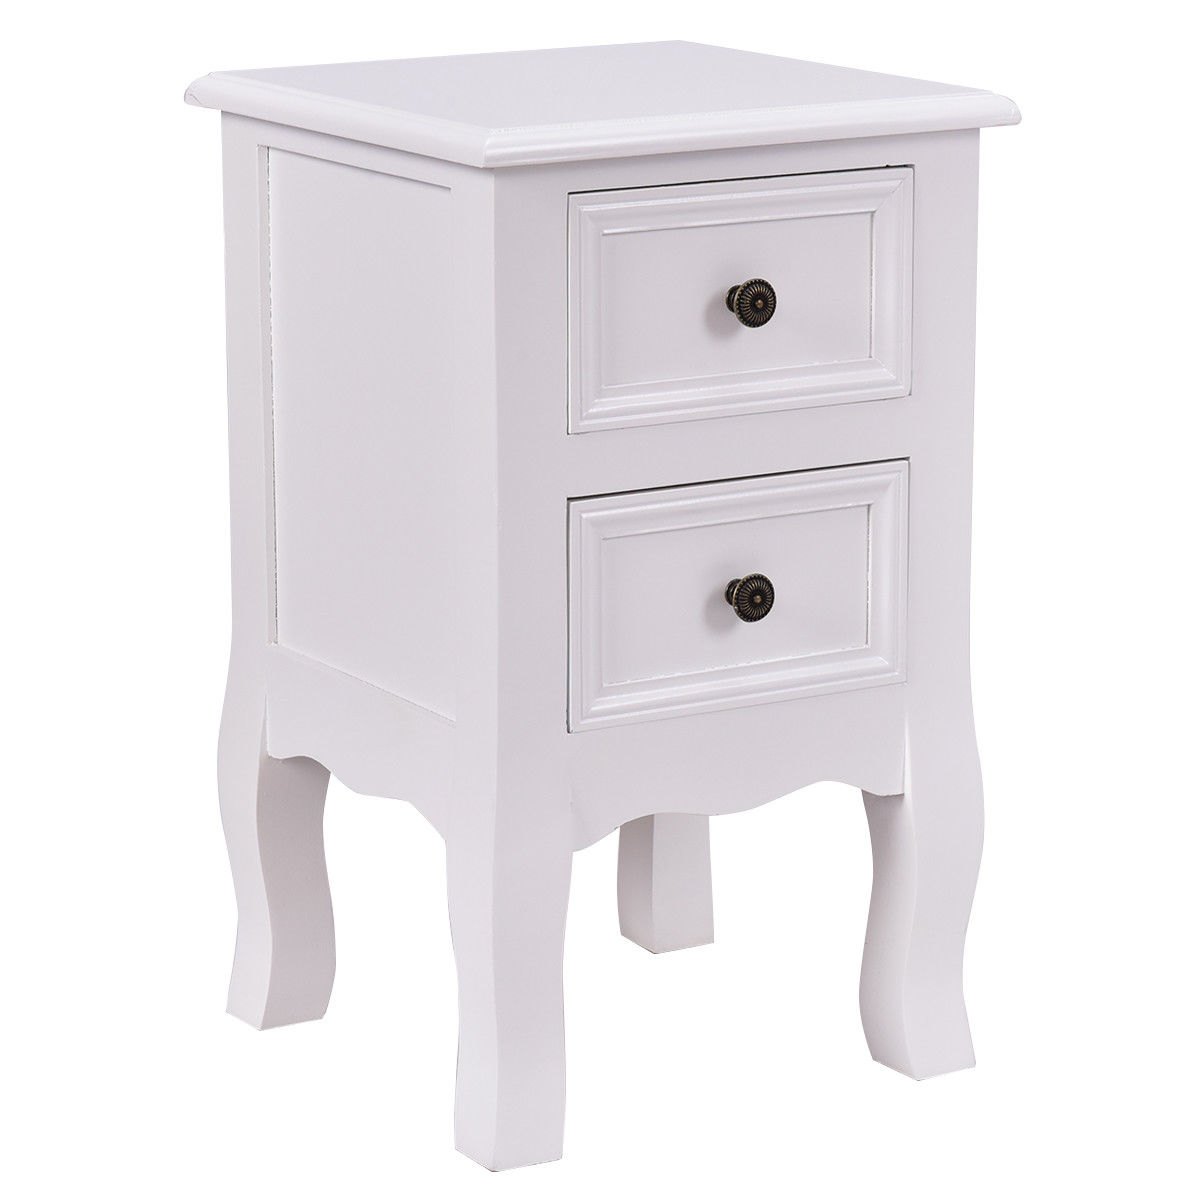 way white night stand storage drawers wood end accent table with hammered metal drum plastic outdoor umbrella hole meyda tiffany lamps target wall mirrors small narrow console